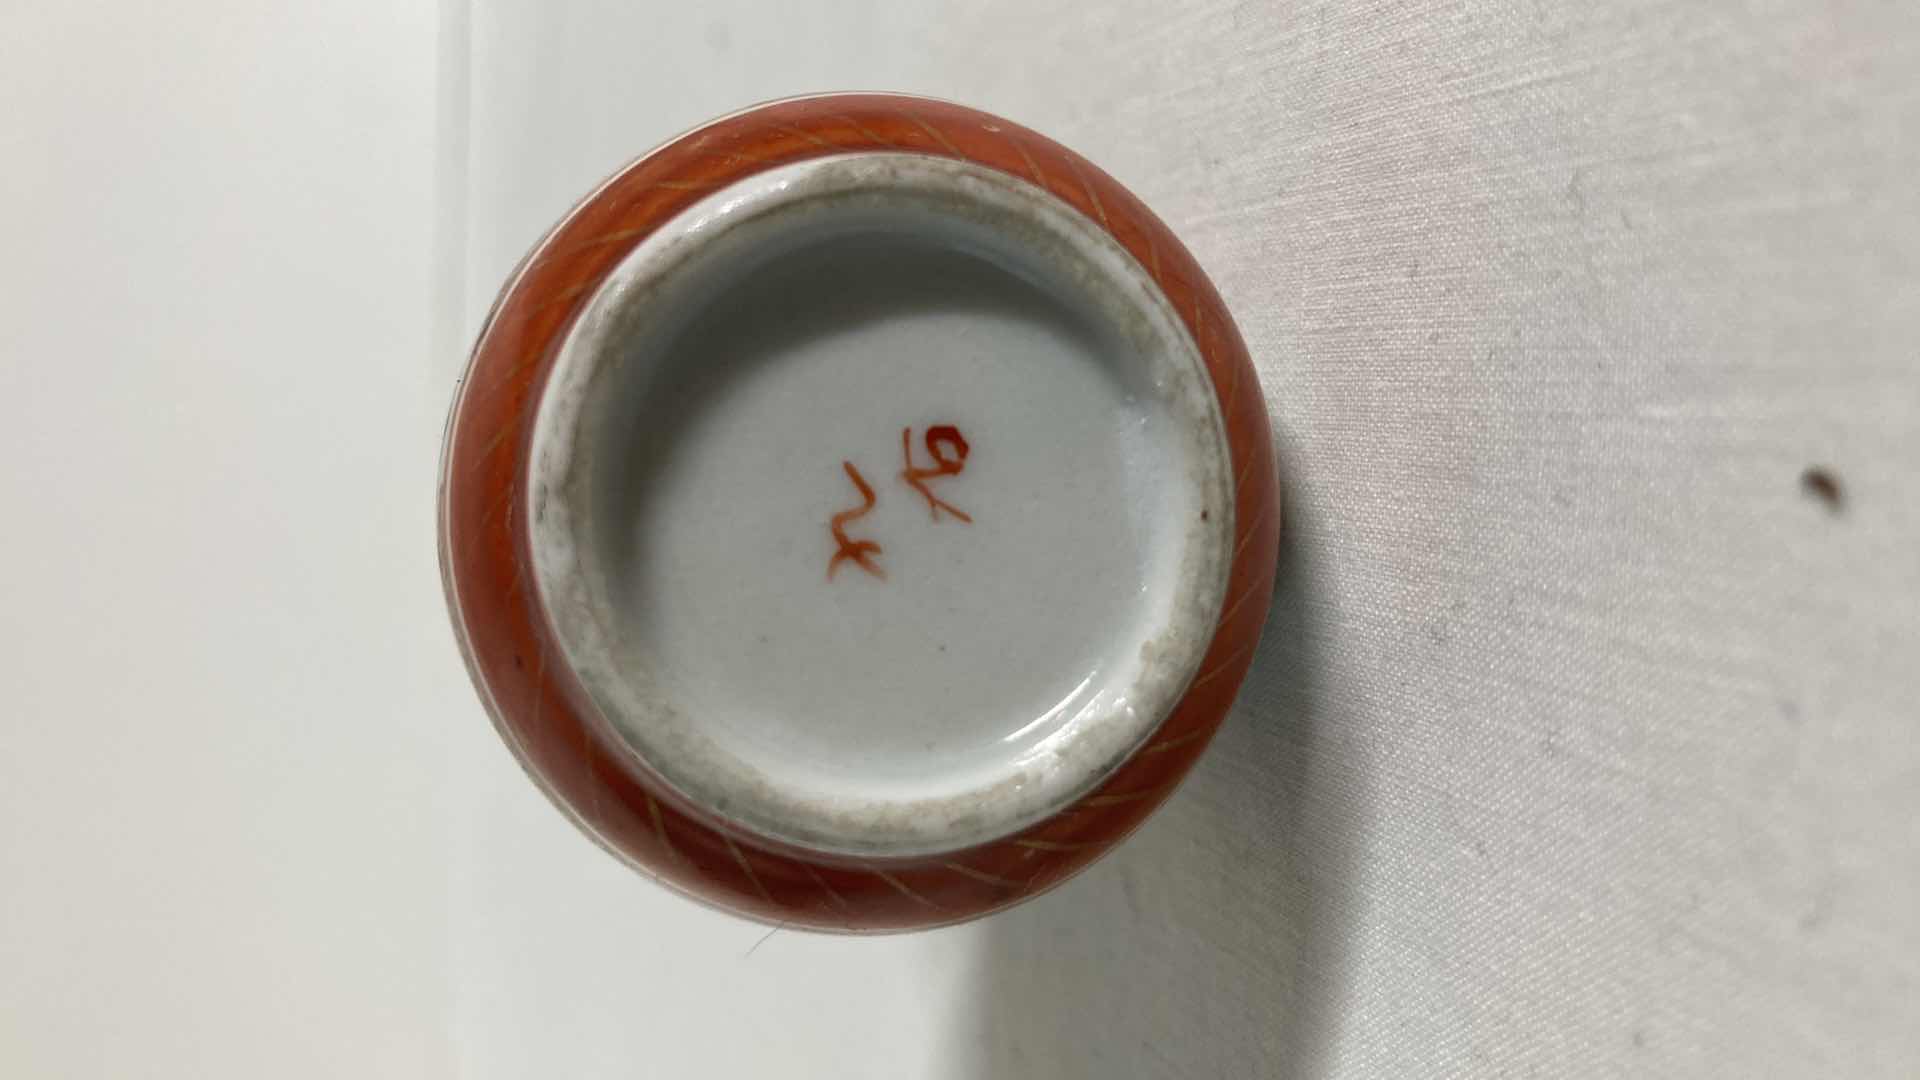 Photo 5 of EARLY CENTURY JAPANESE MINIATURE HAND PAINTED PORCELAIN VASE SIGNED BY ARTIST 1.75” X 3.5”